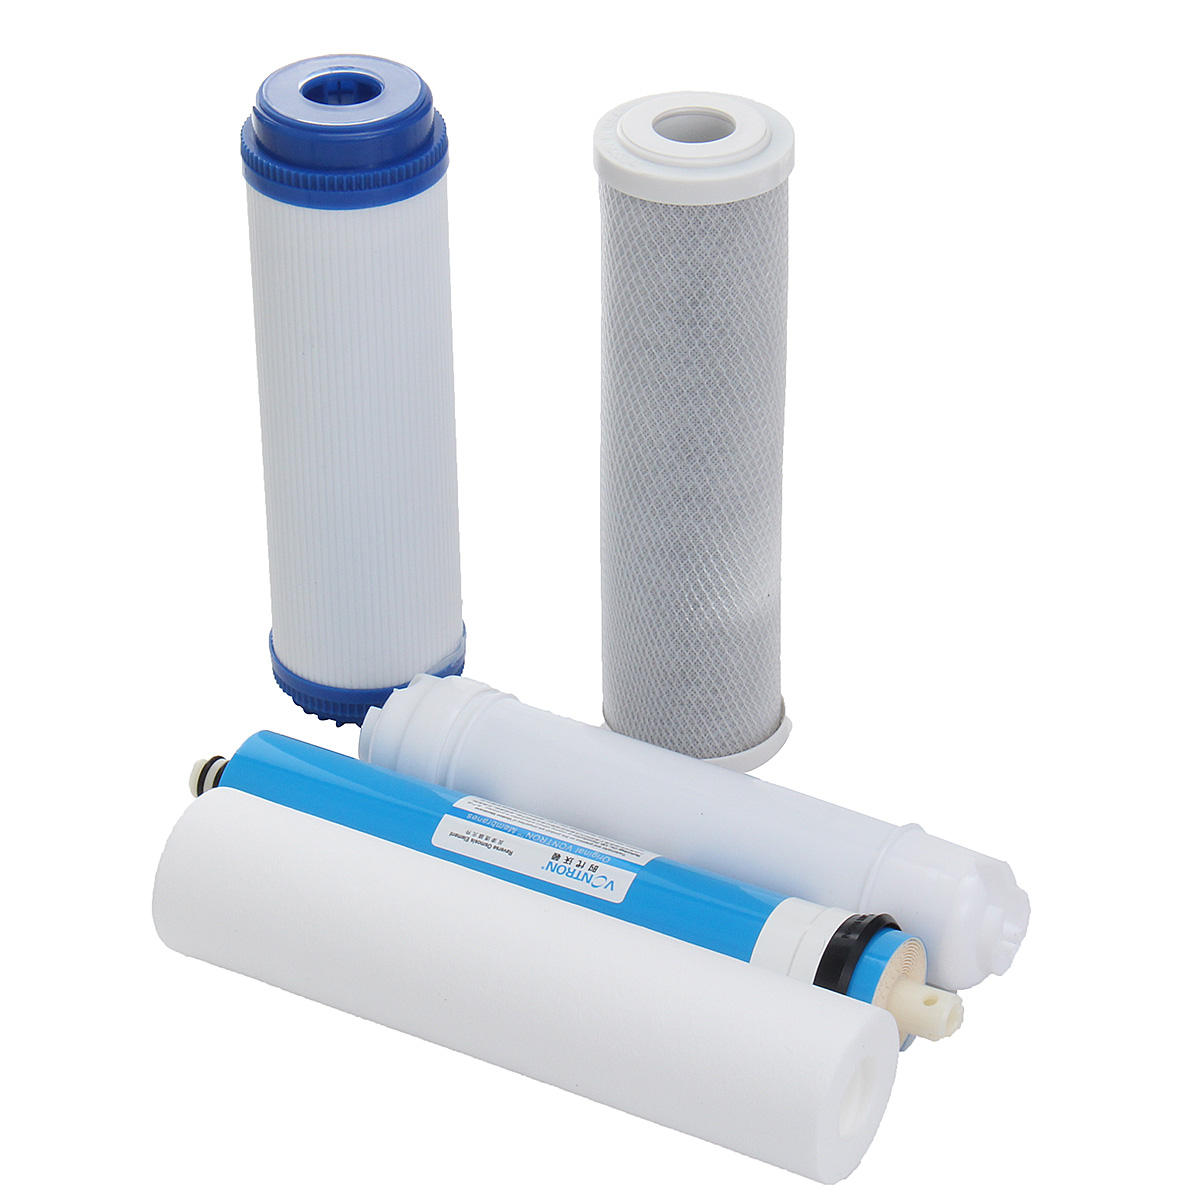 5 stage reverse osmosis full replacement water filter kit with 50 gpd membrane home applicance